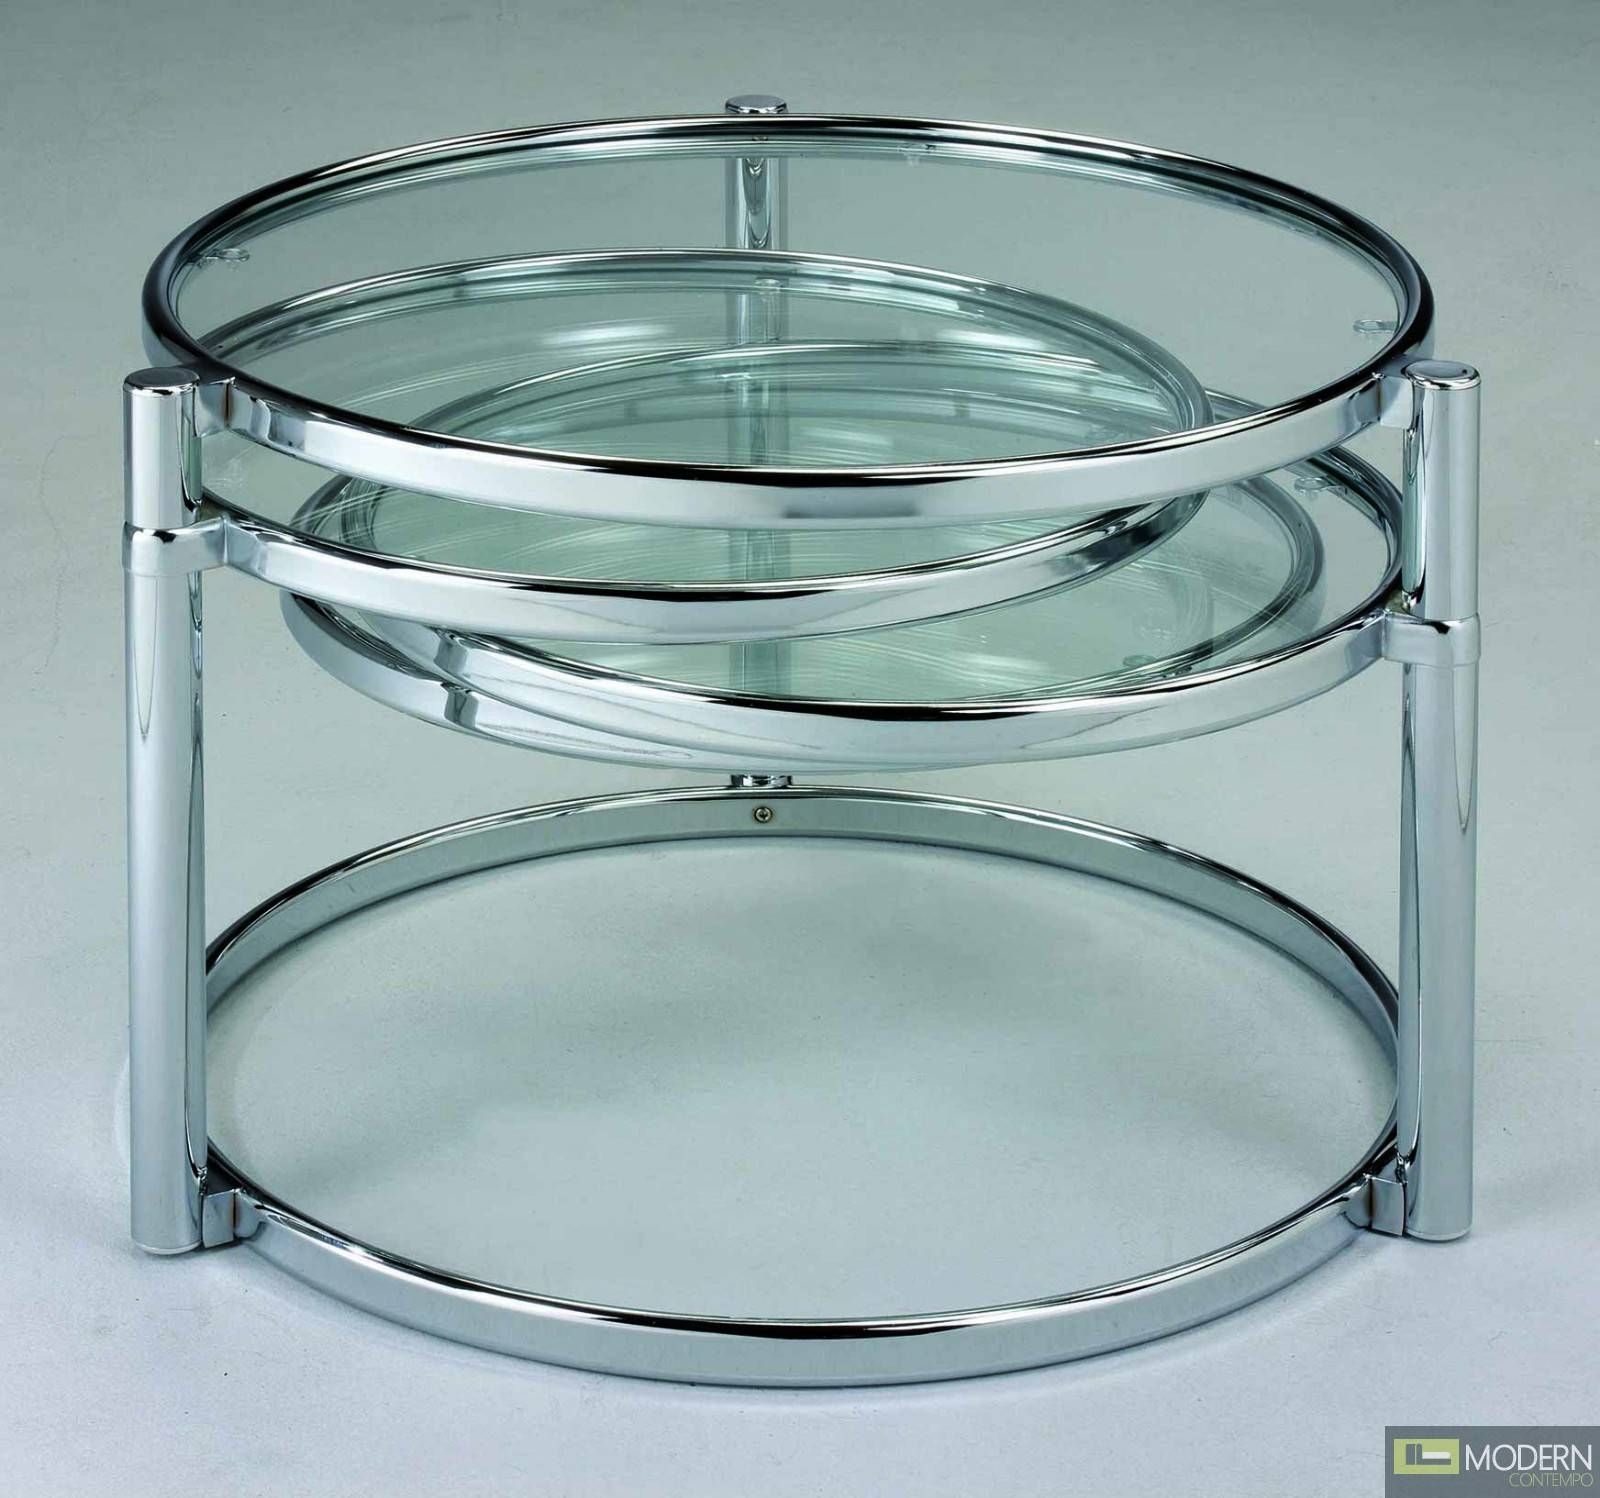 Modern Contemporary Chrome Swivel Glass Coffee Cocktail Table Zcota15 Intended For Swivel Coffee Tables (View 28 of 30)